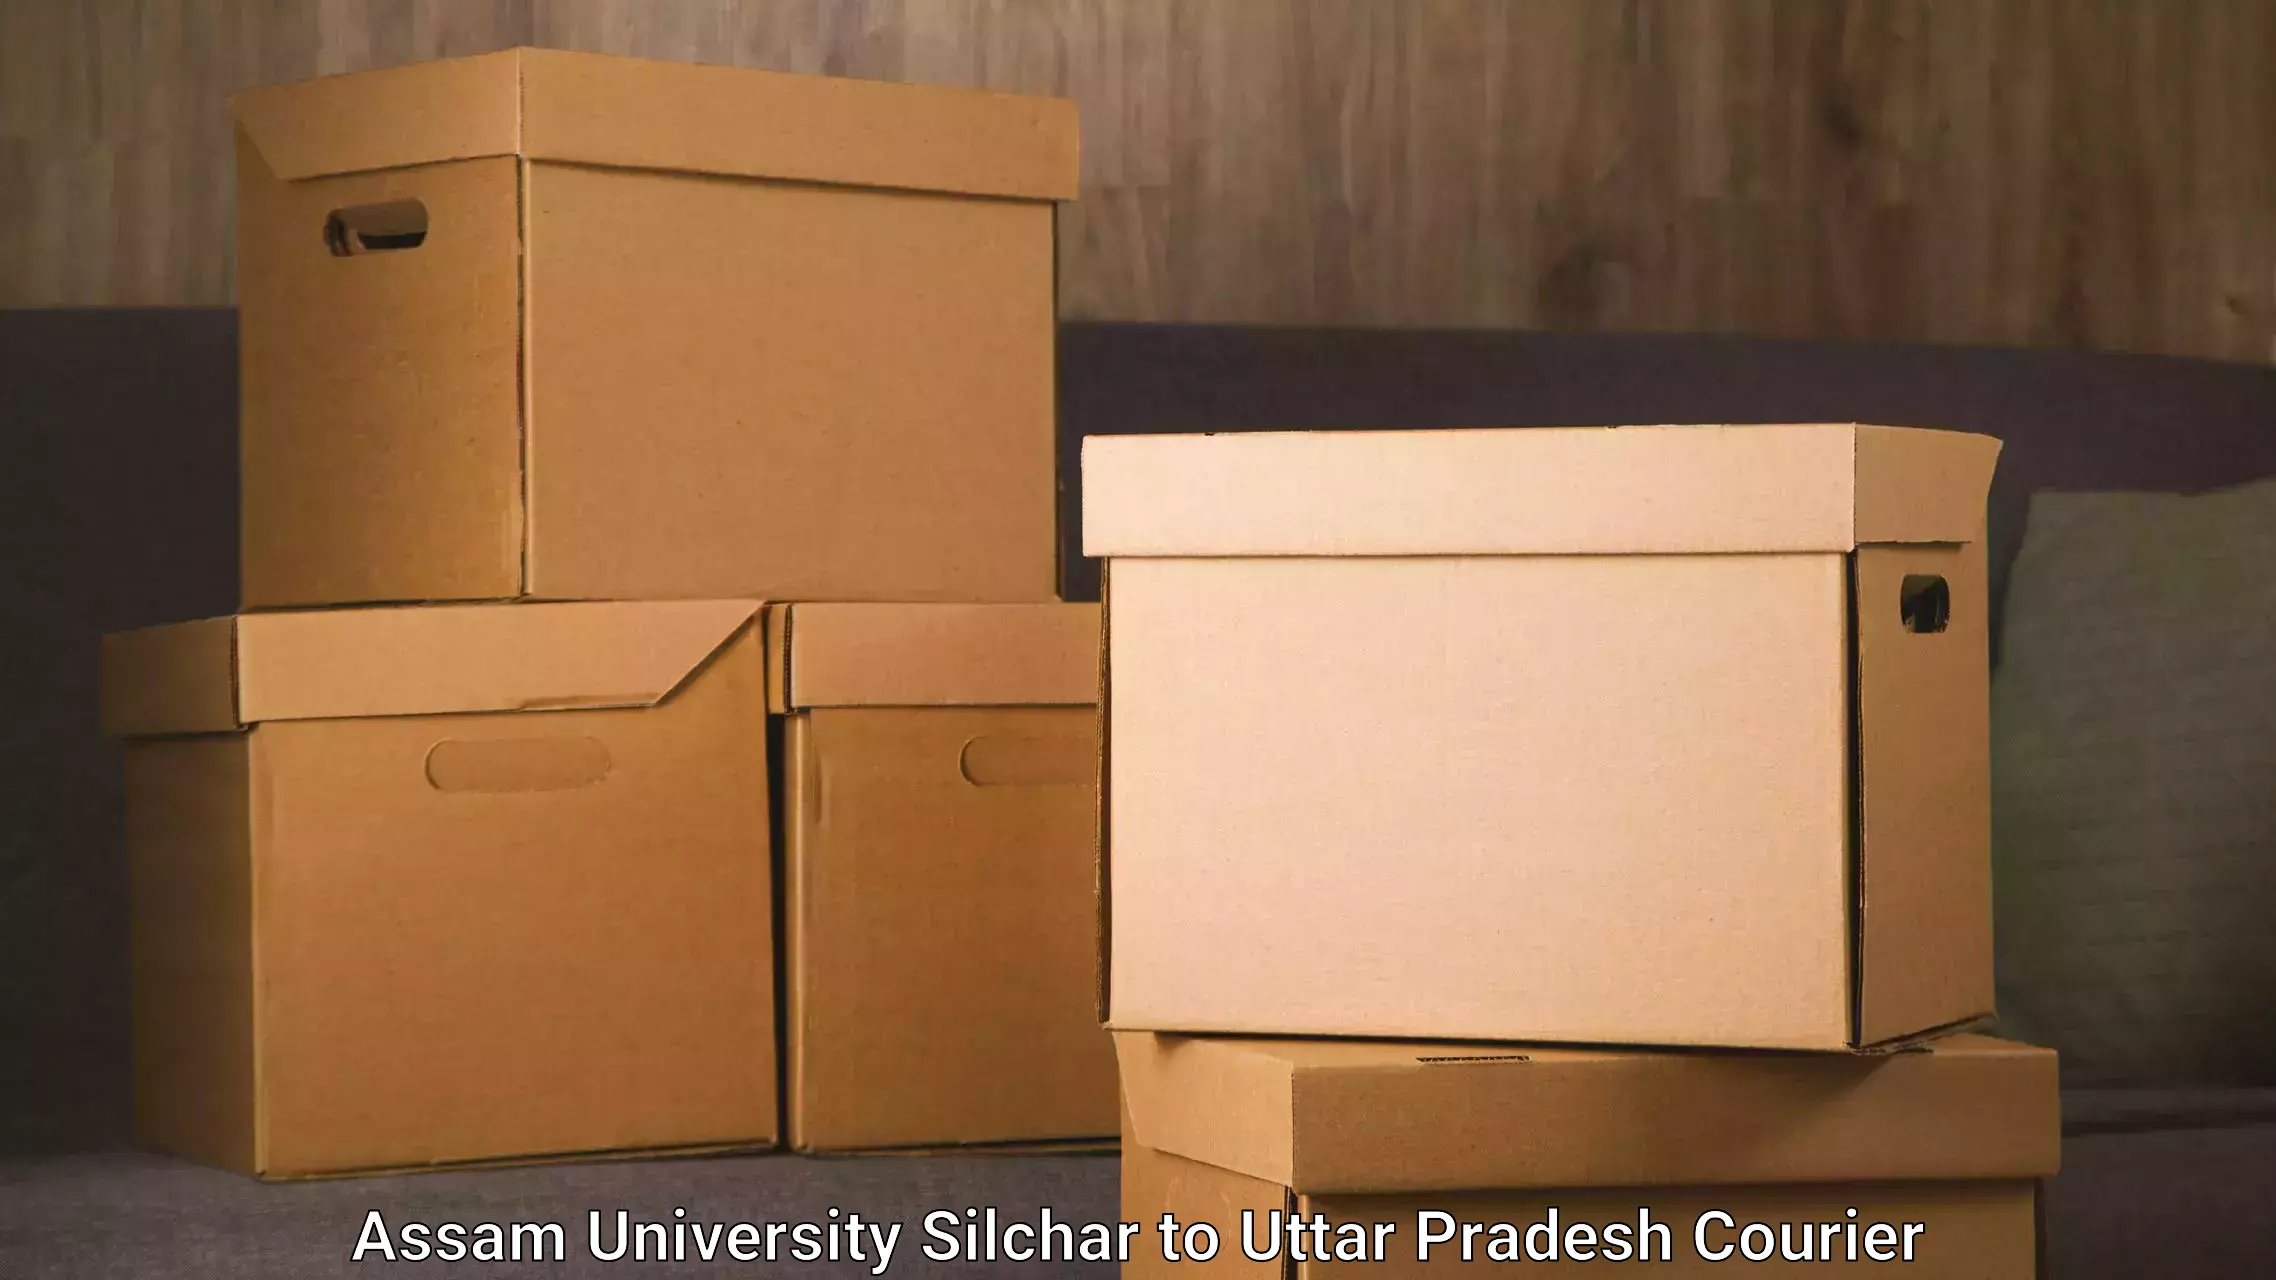 Express package services Assam University Silchar to Lucknow